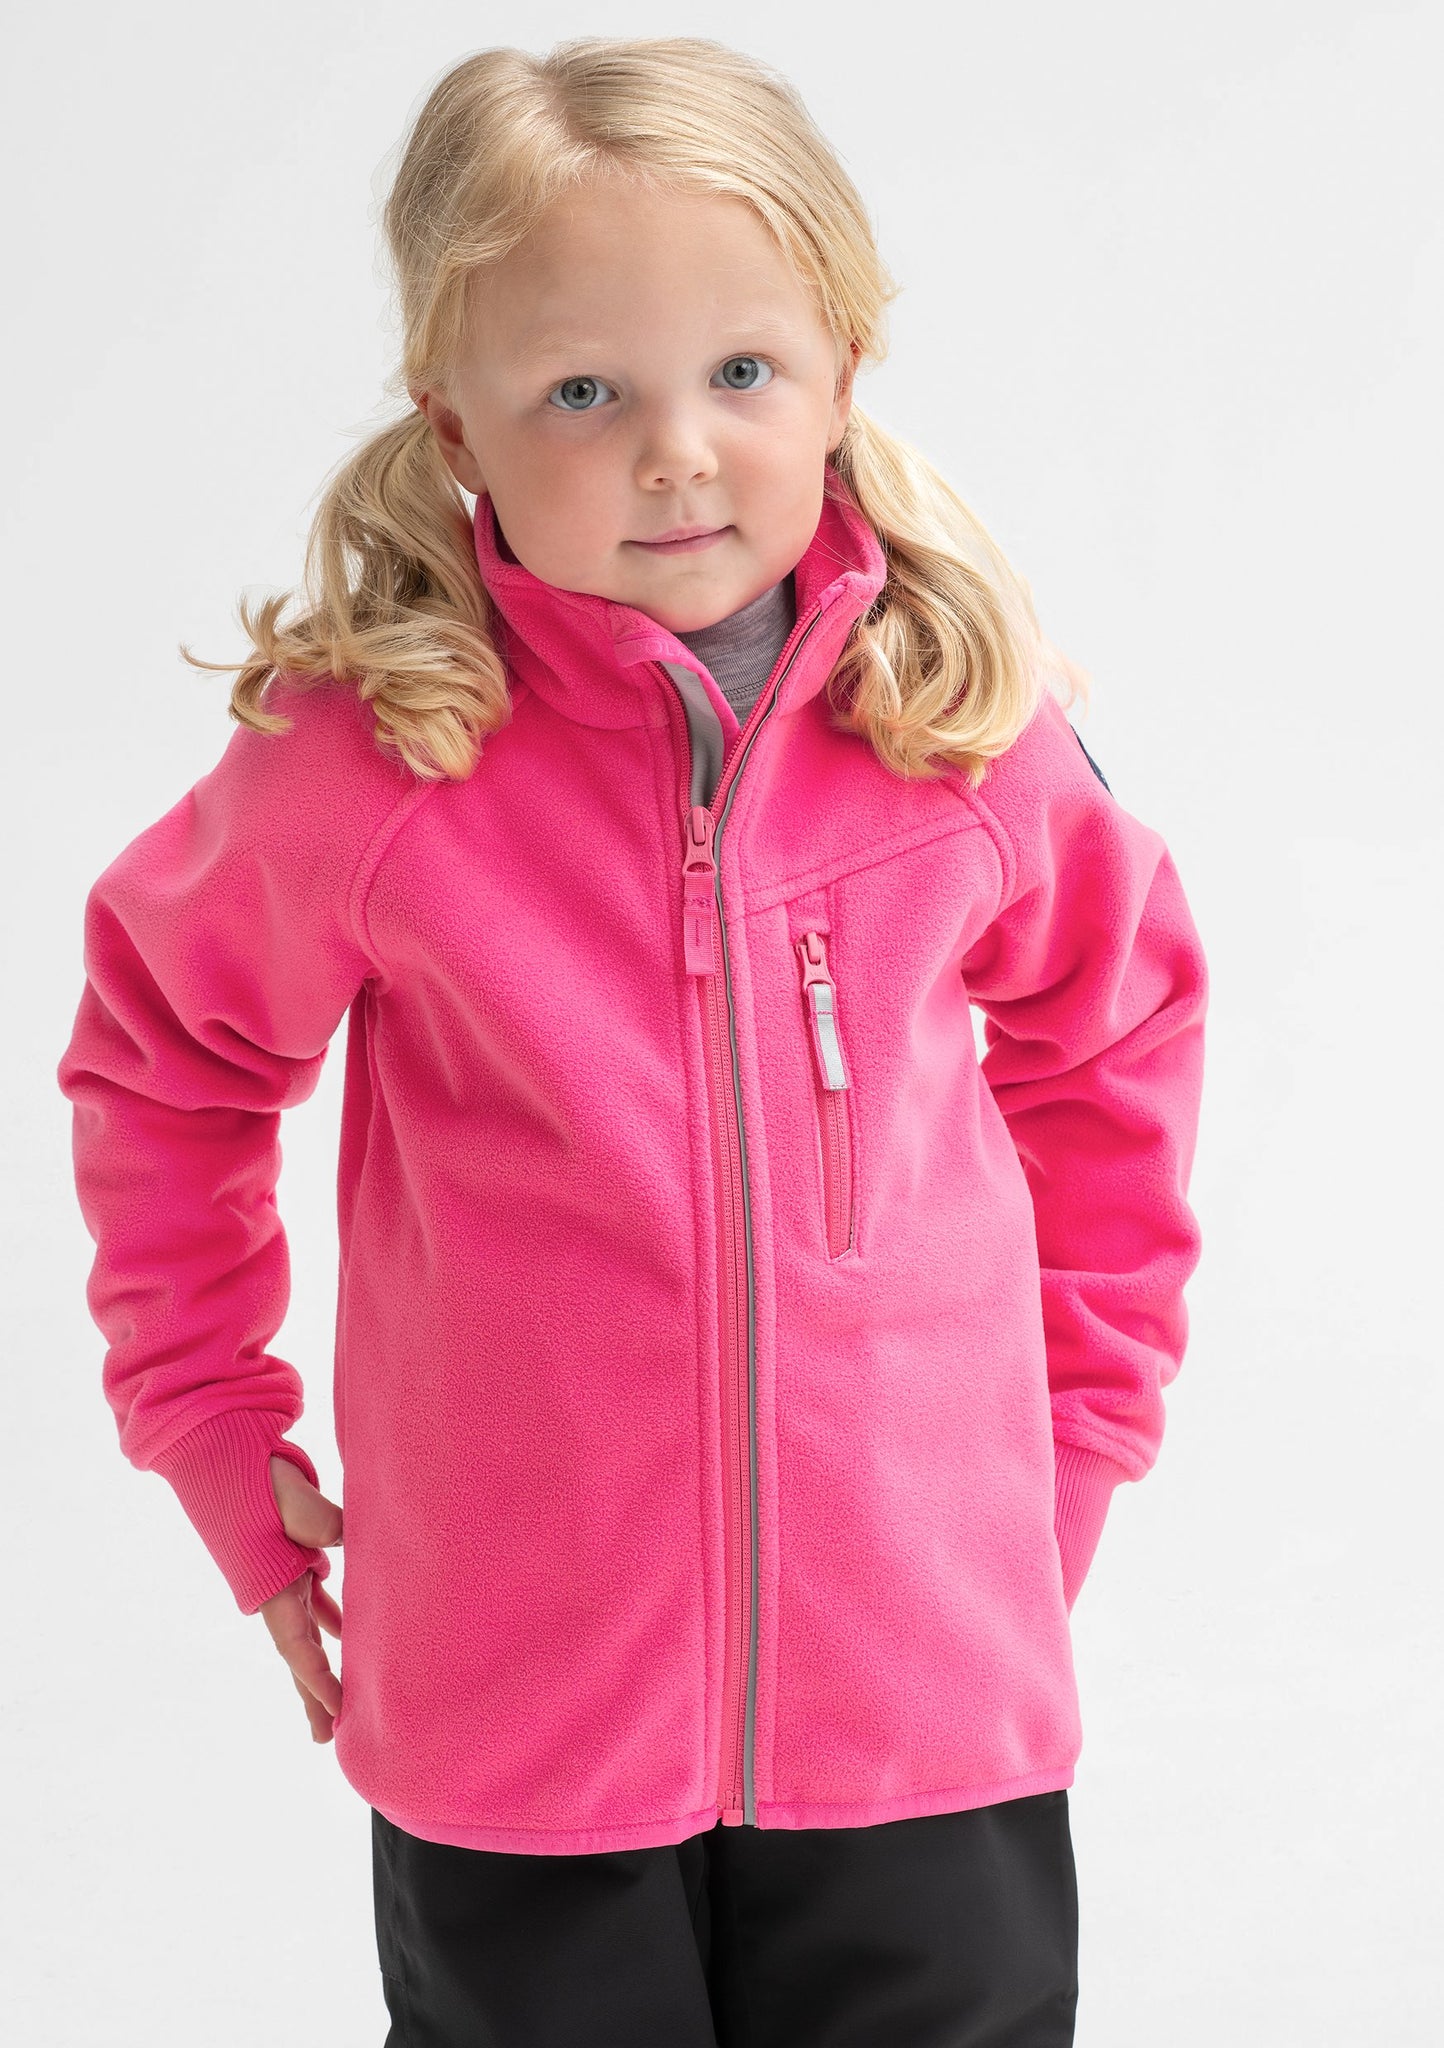 A young girl sporting a pink, kids waterproof fleece jacket made of breathable fabric, comes with cuff thumbholes.